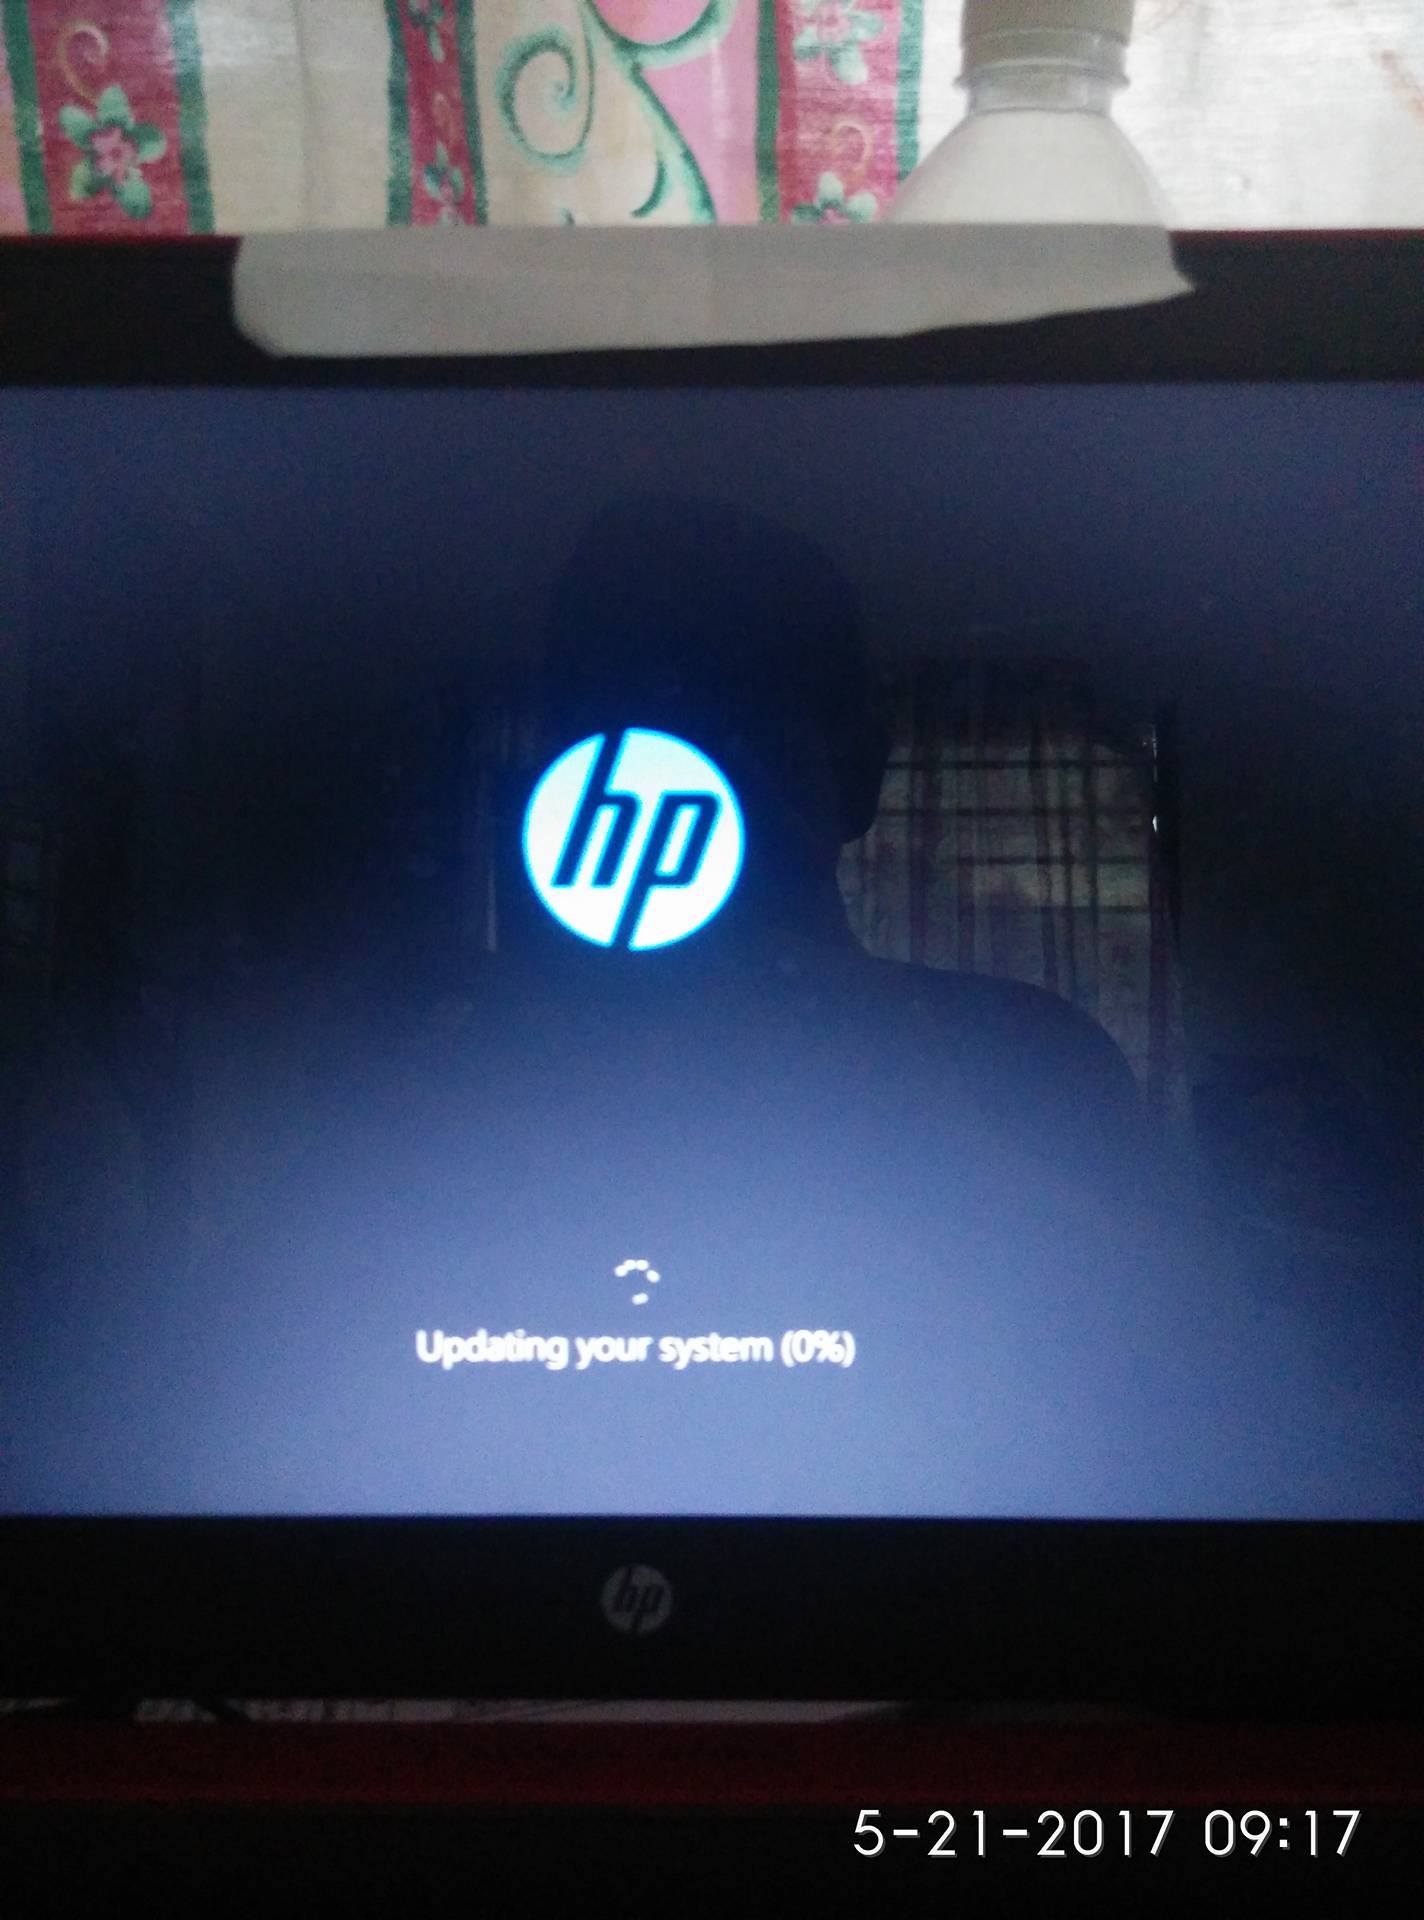 Window update keep stuck at 0 % - HP Support Community - 6132714